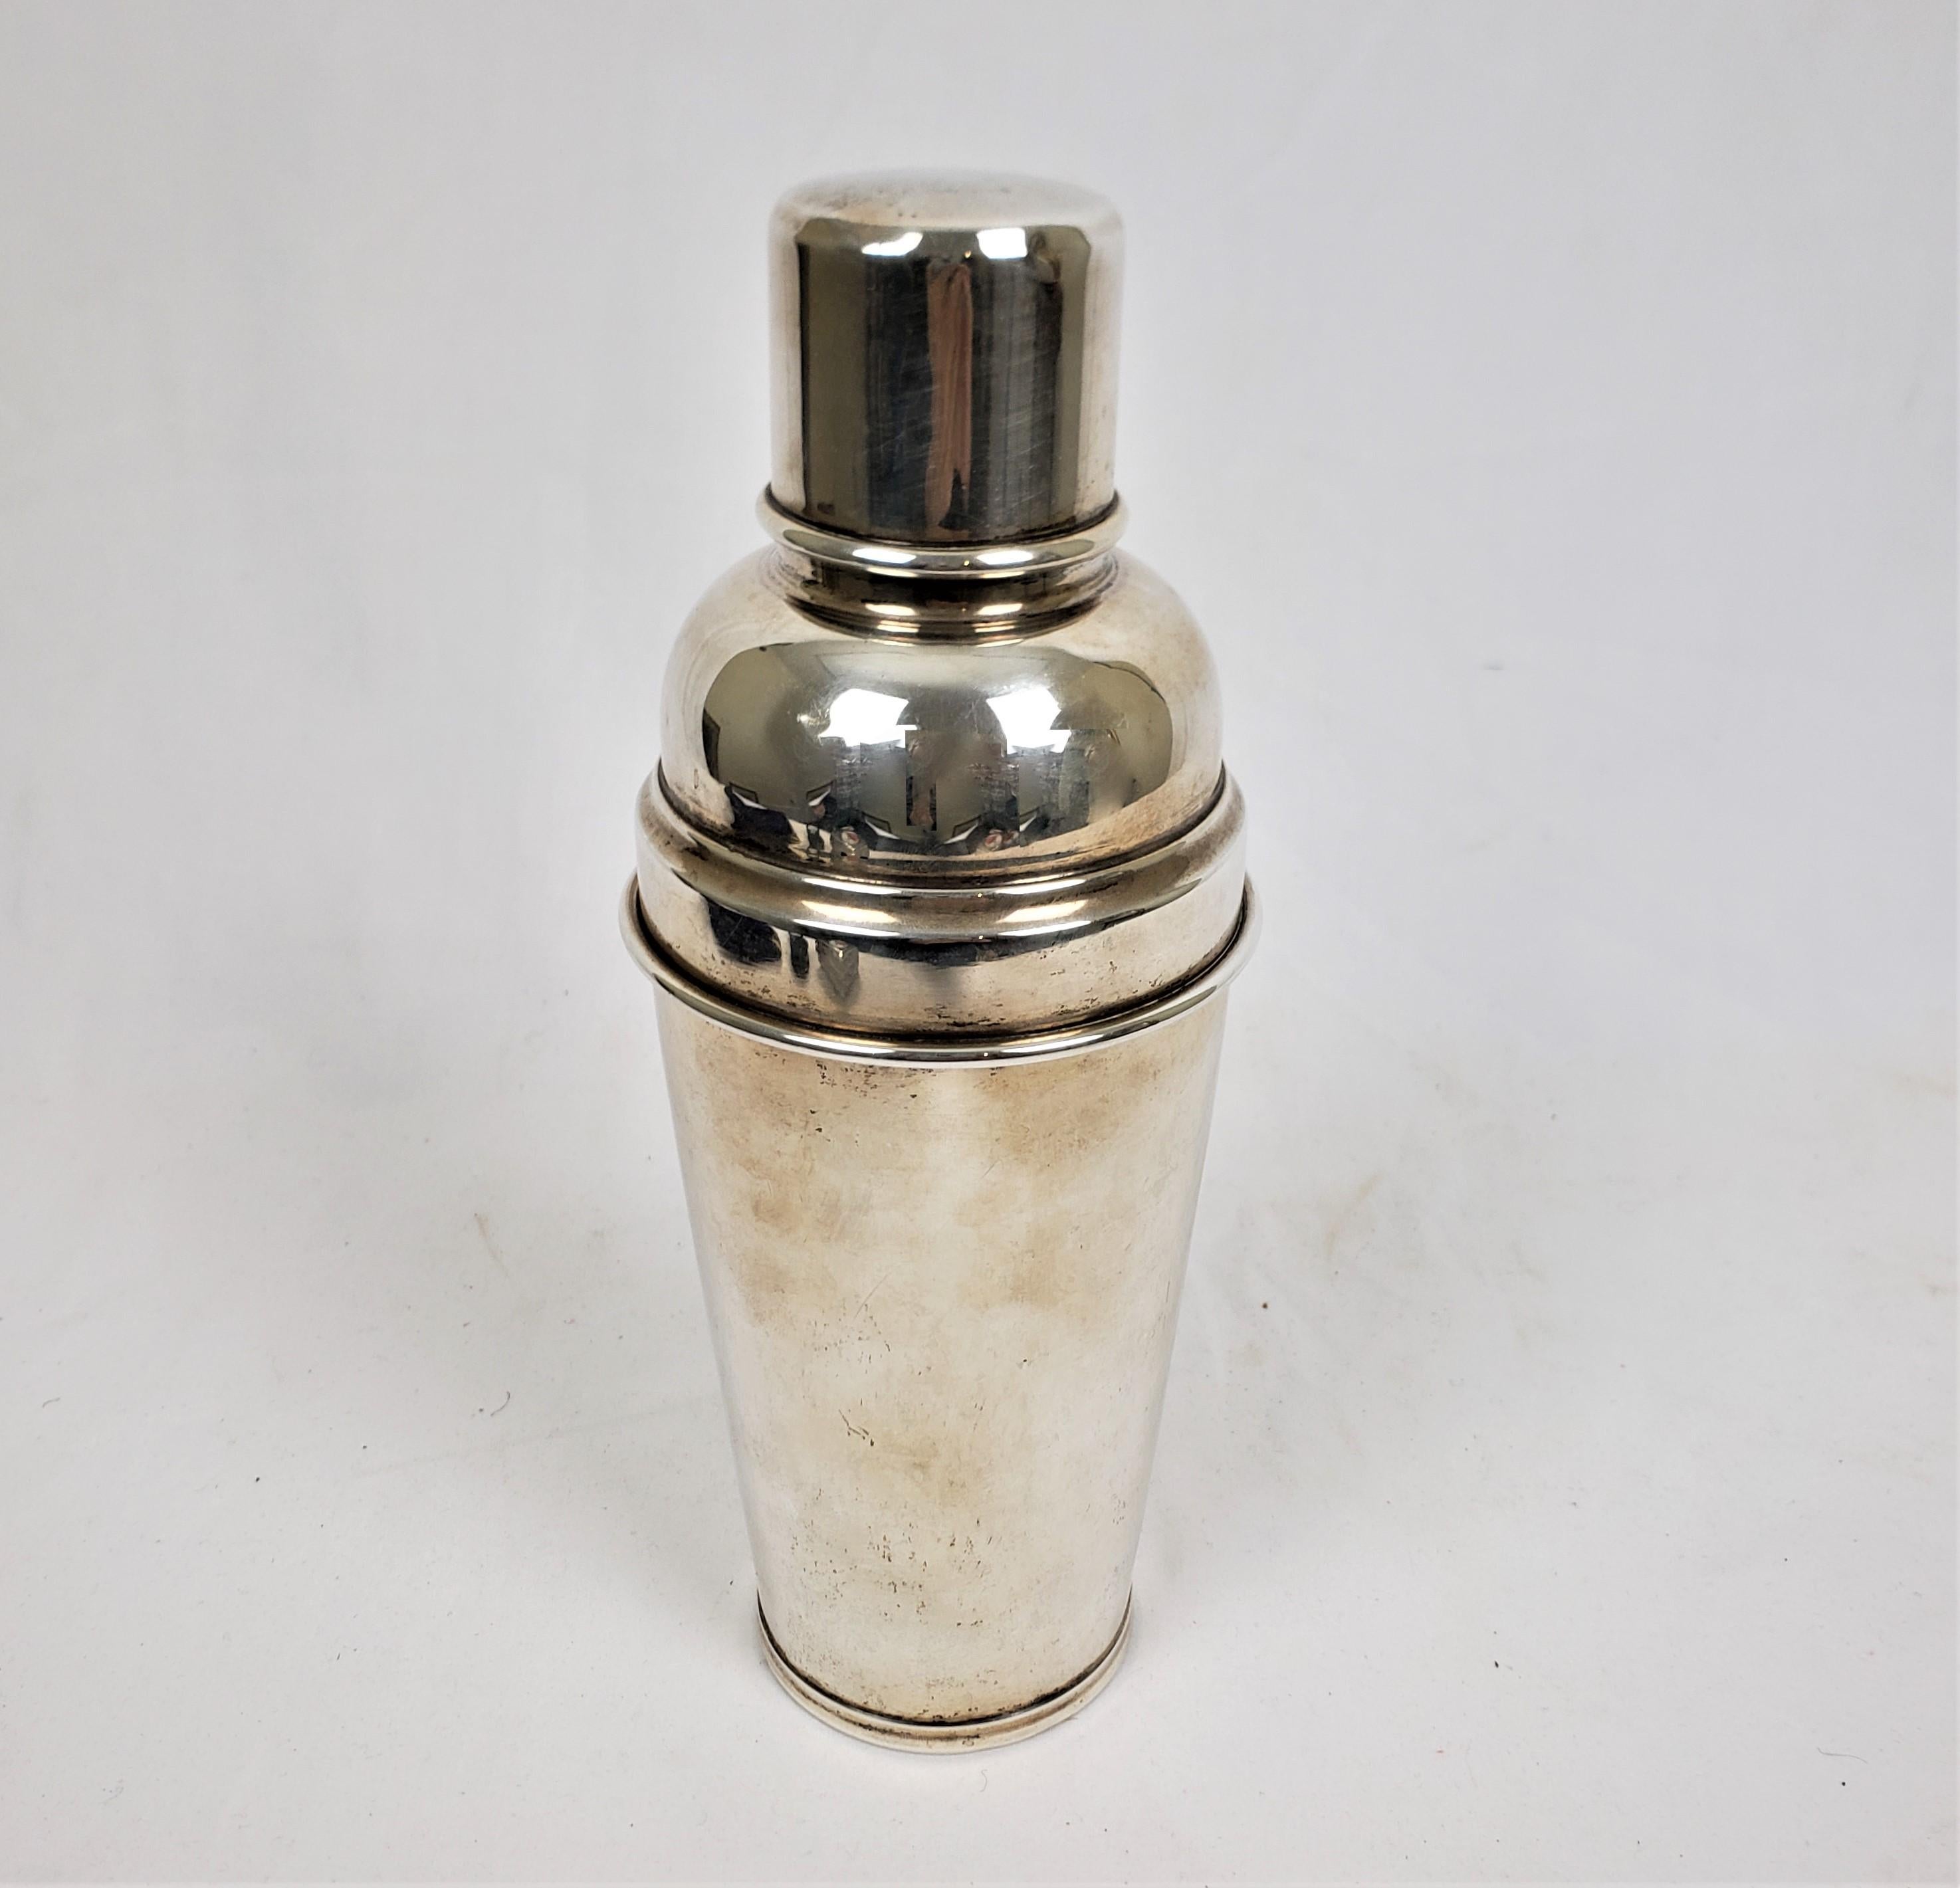 This cocktail shaker is hallmarked by an unknown maker and originated from either Peru or Mexico and dates to approximately 1960 and done in the period Mid-Century Modern style. The cocktail shaker is cmposed of sterling silver and is made up of of